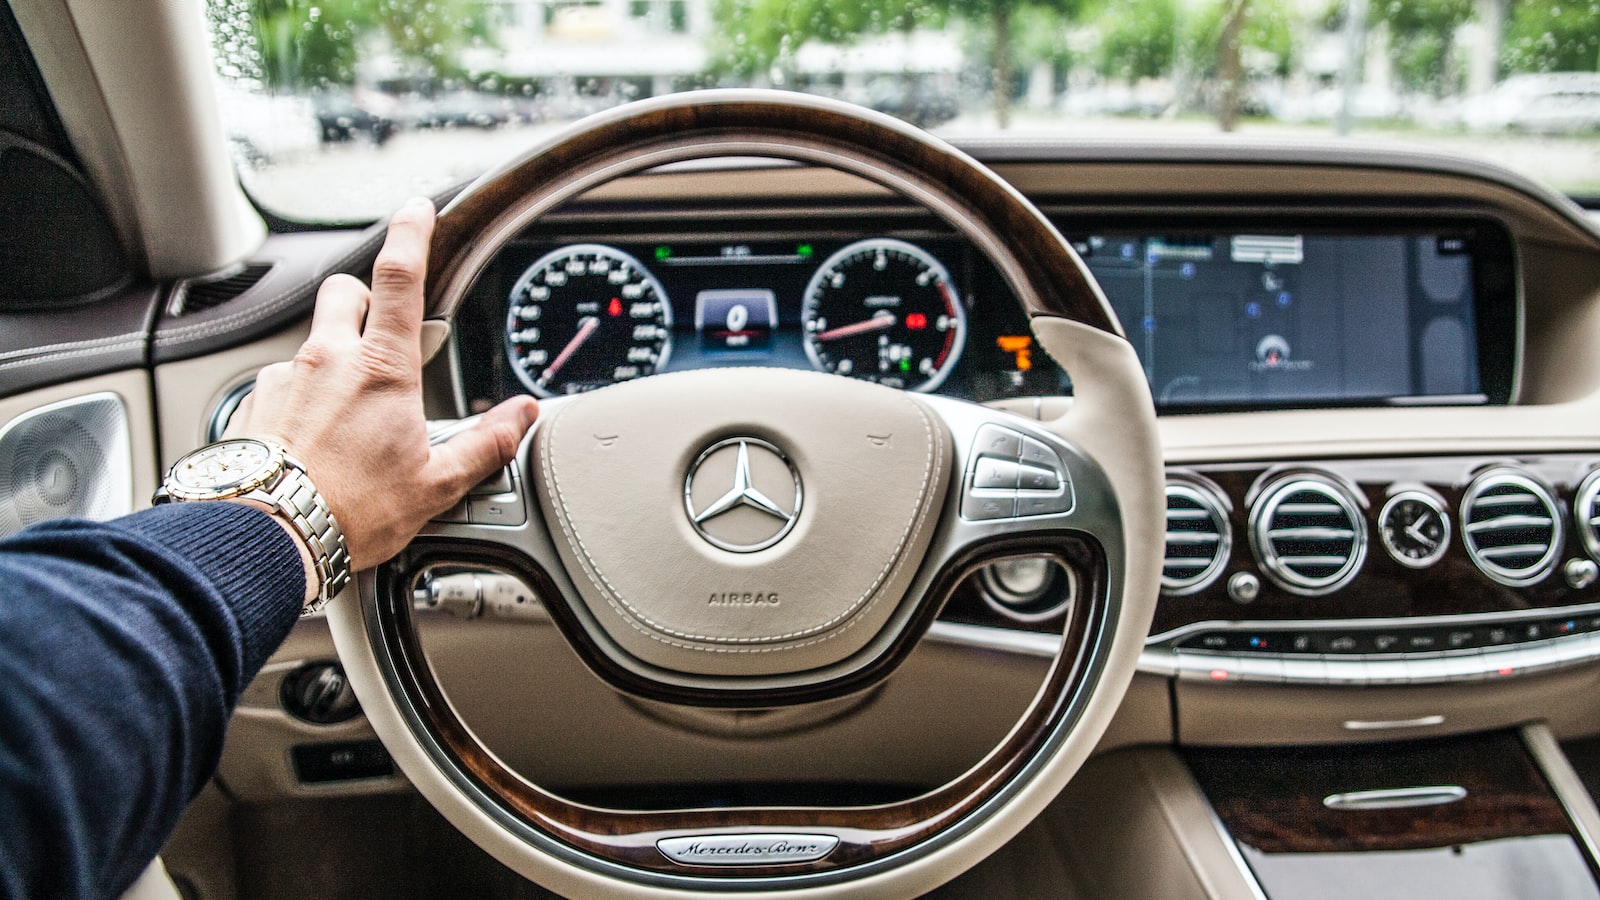 Exploring the Luxury Car's Performance: Tips for an Informed Drive